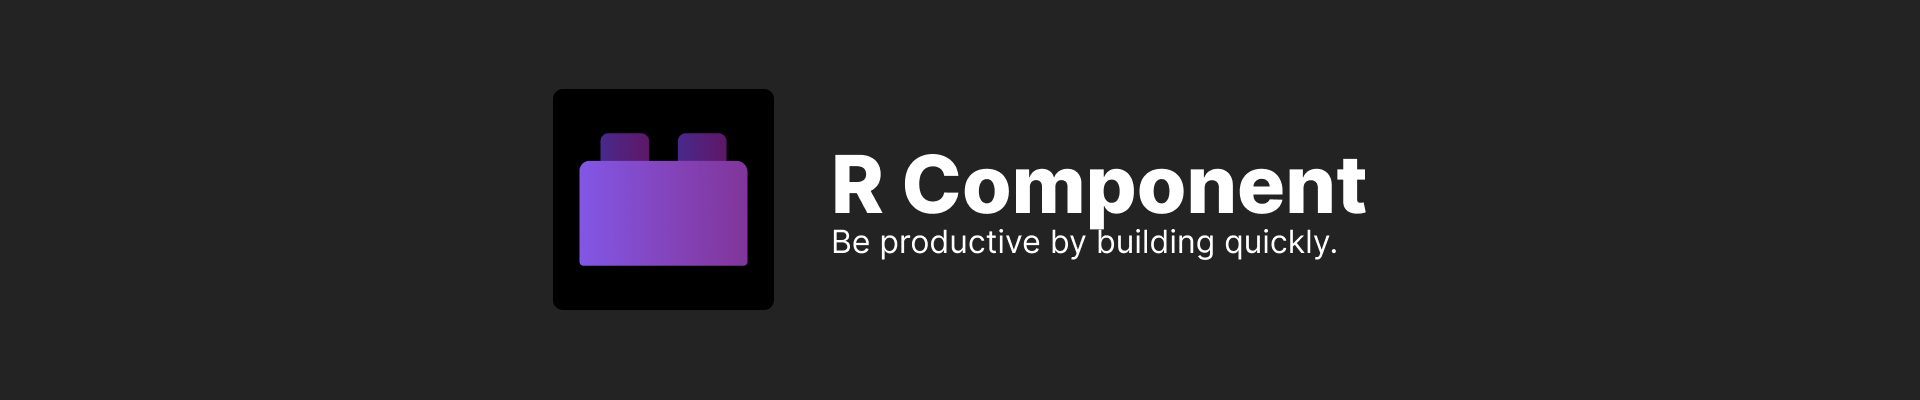 R Component